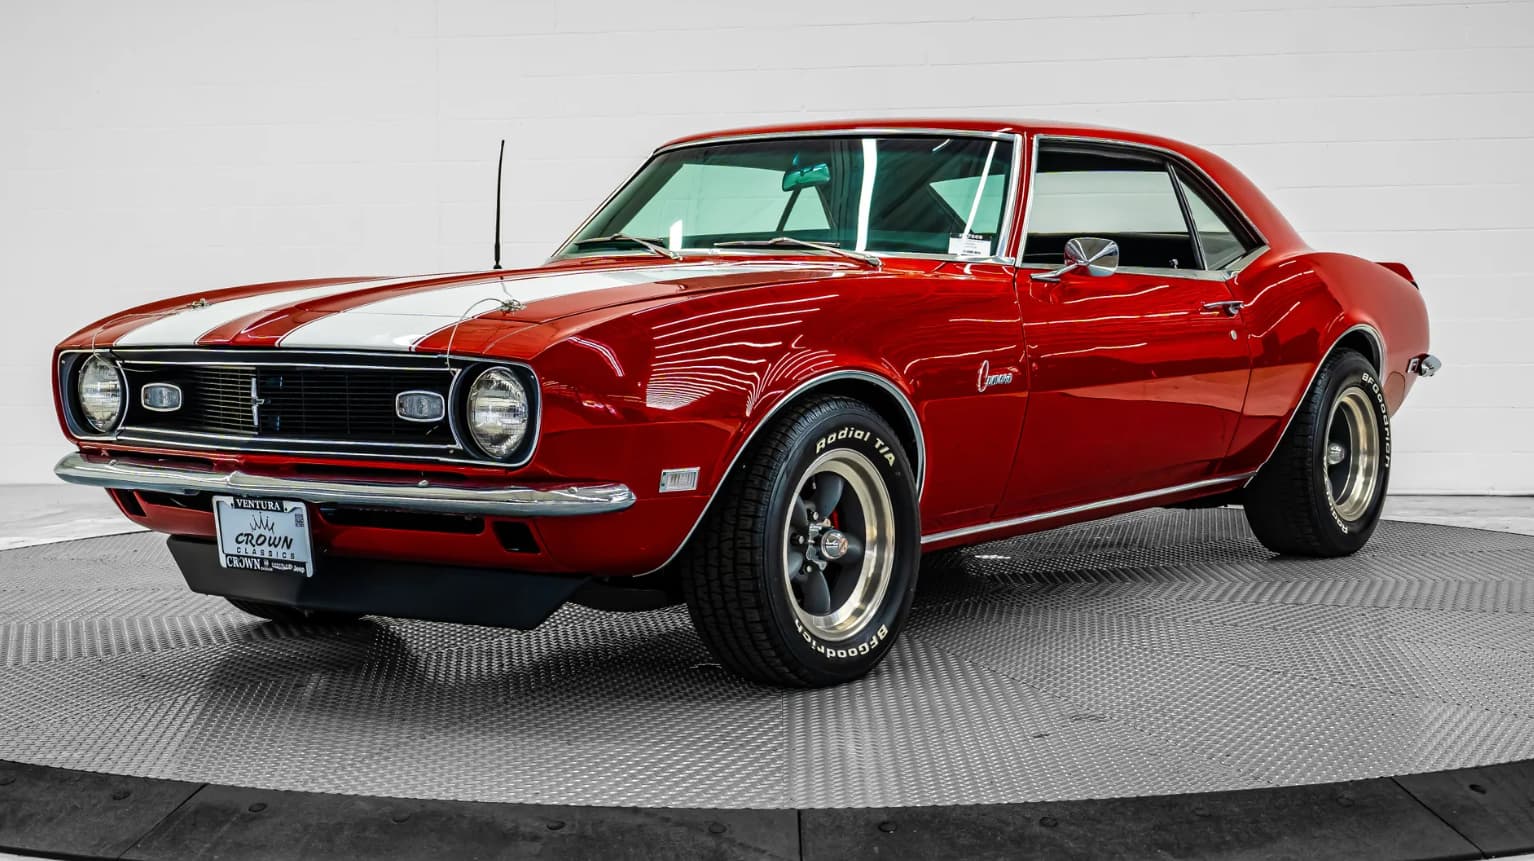 Unforgettable Elegance: Experience the Timeless Beauty of the 1968 Chevrolet Camaro!